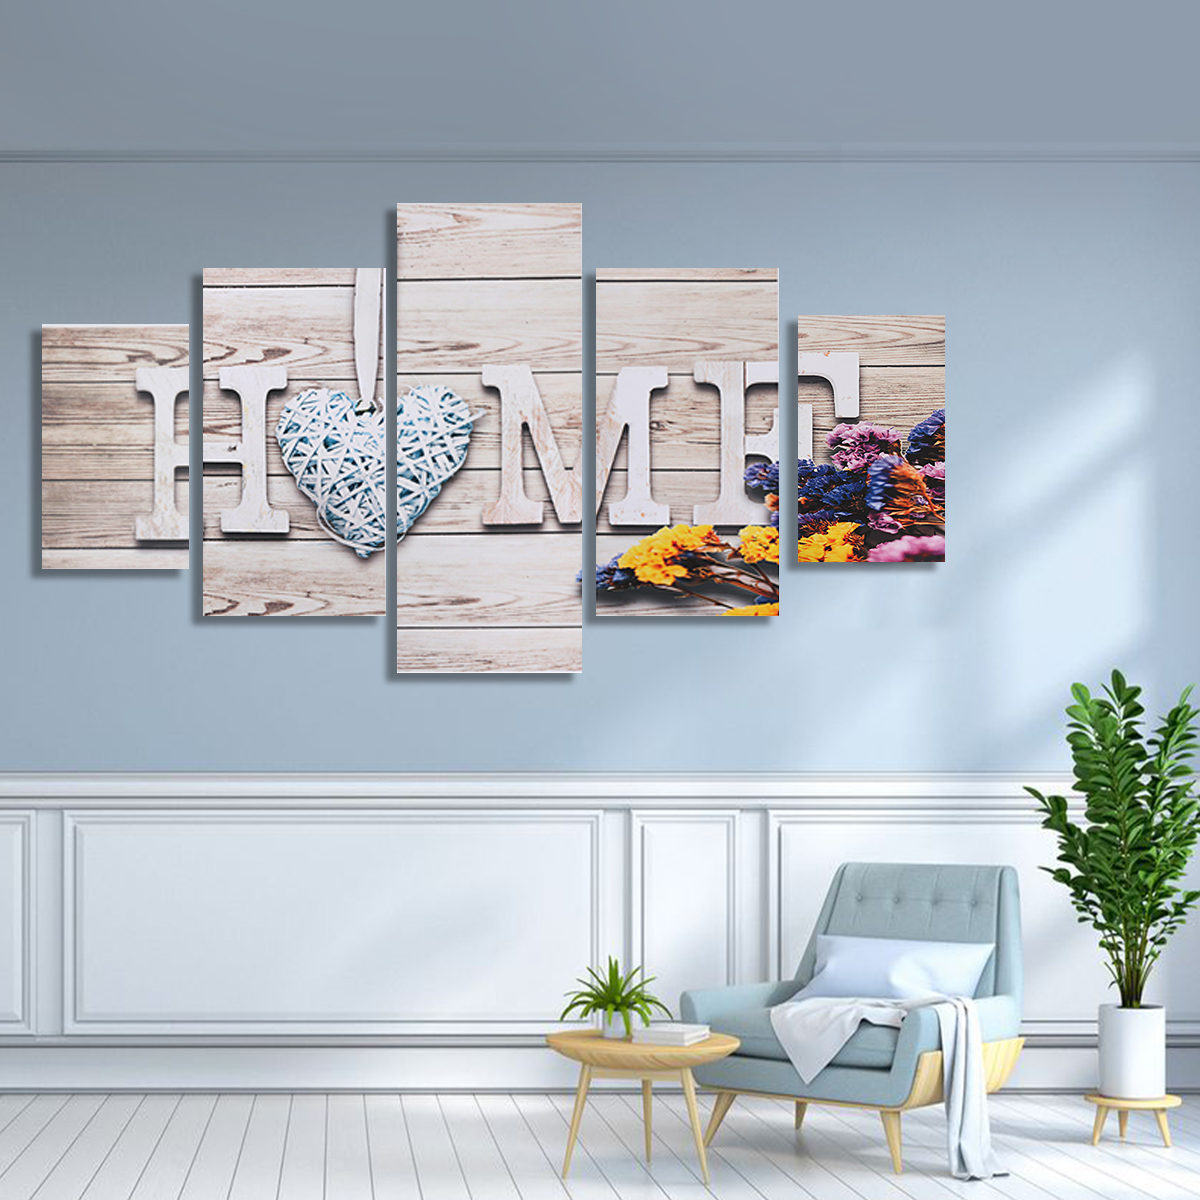 5Pcs-Canvas-Paintings-Love-HOME-Wall-Decorative-Print-Art-Pictures-Unframed-Wall-Hanging-Home-Office-1785063-5